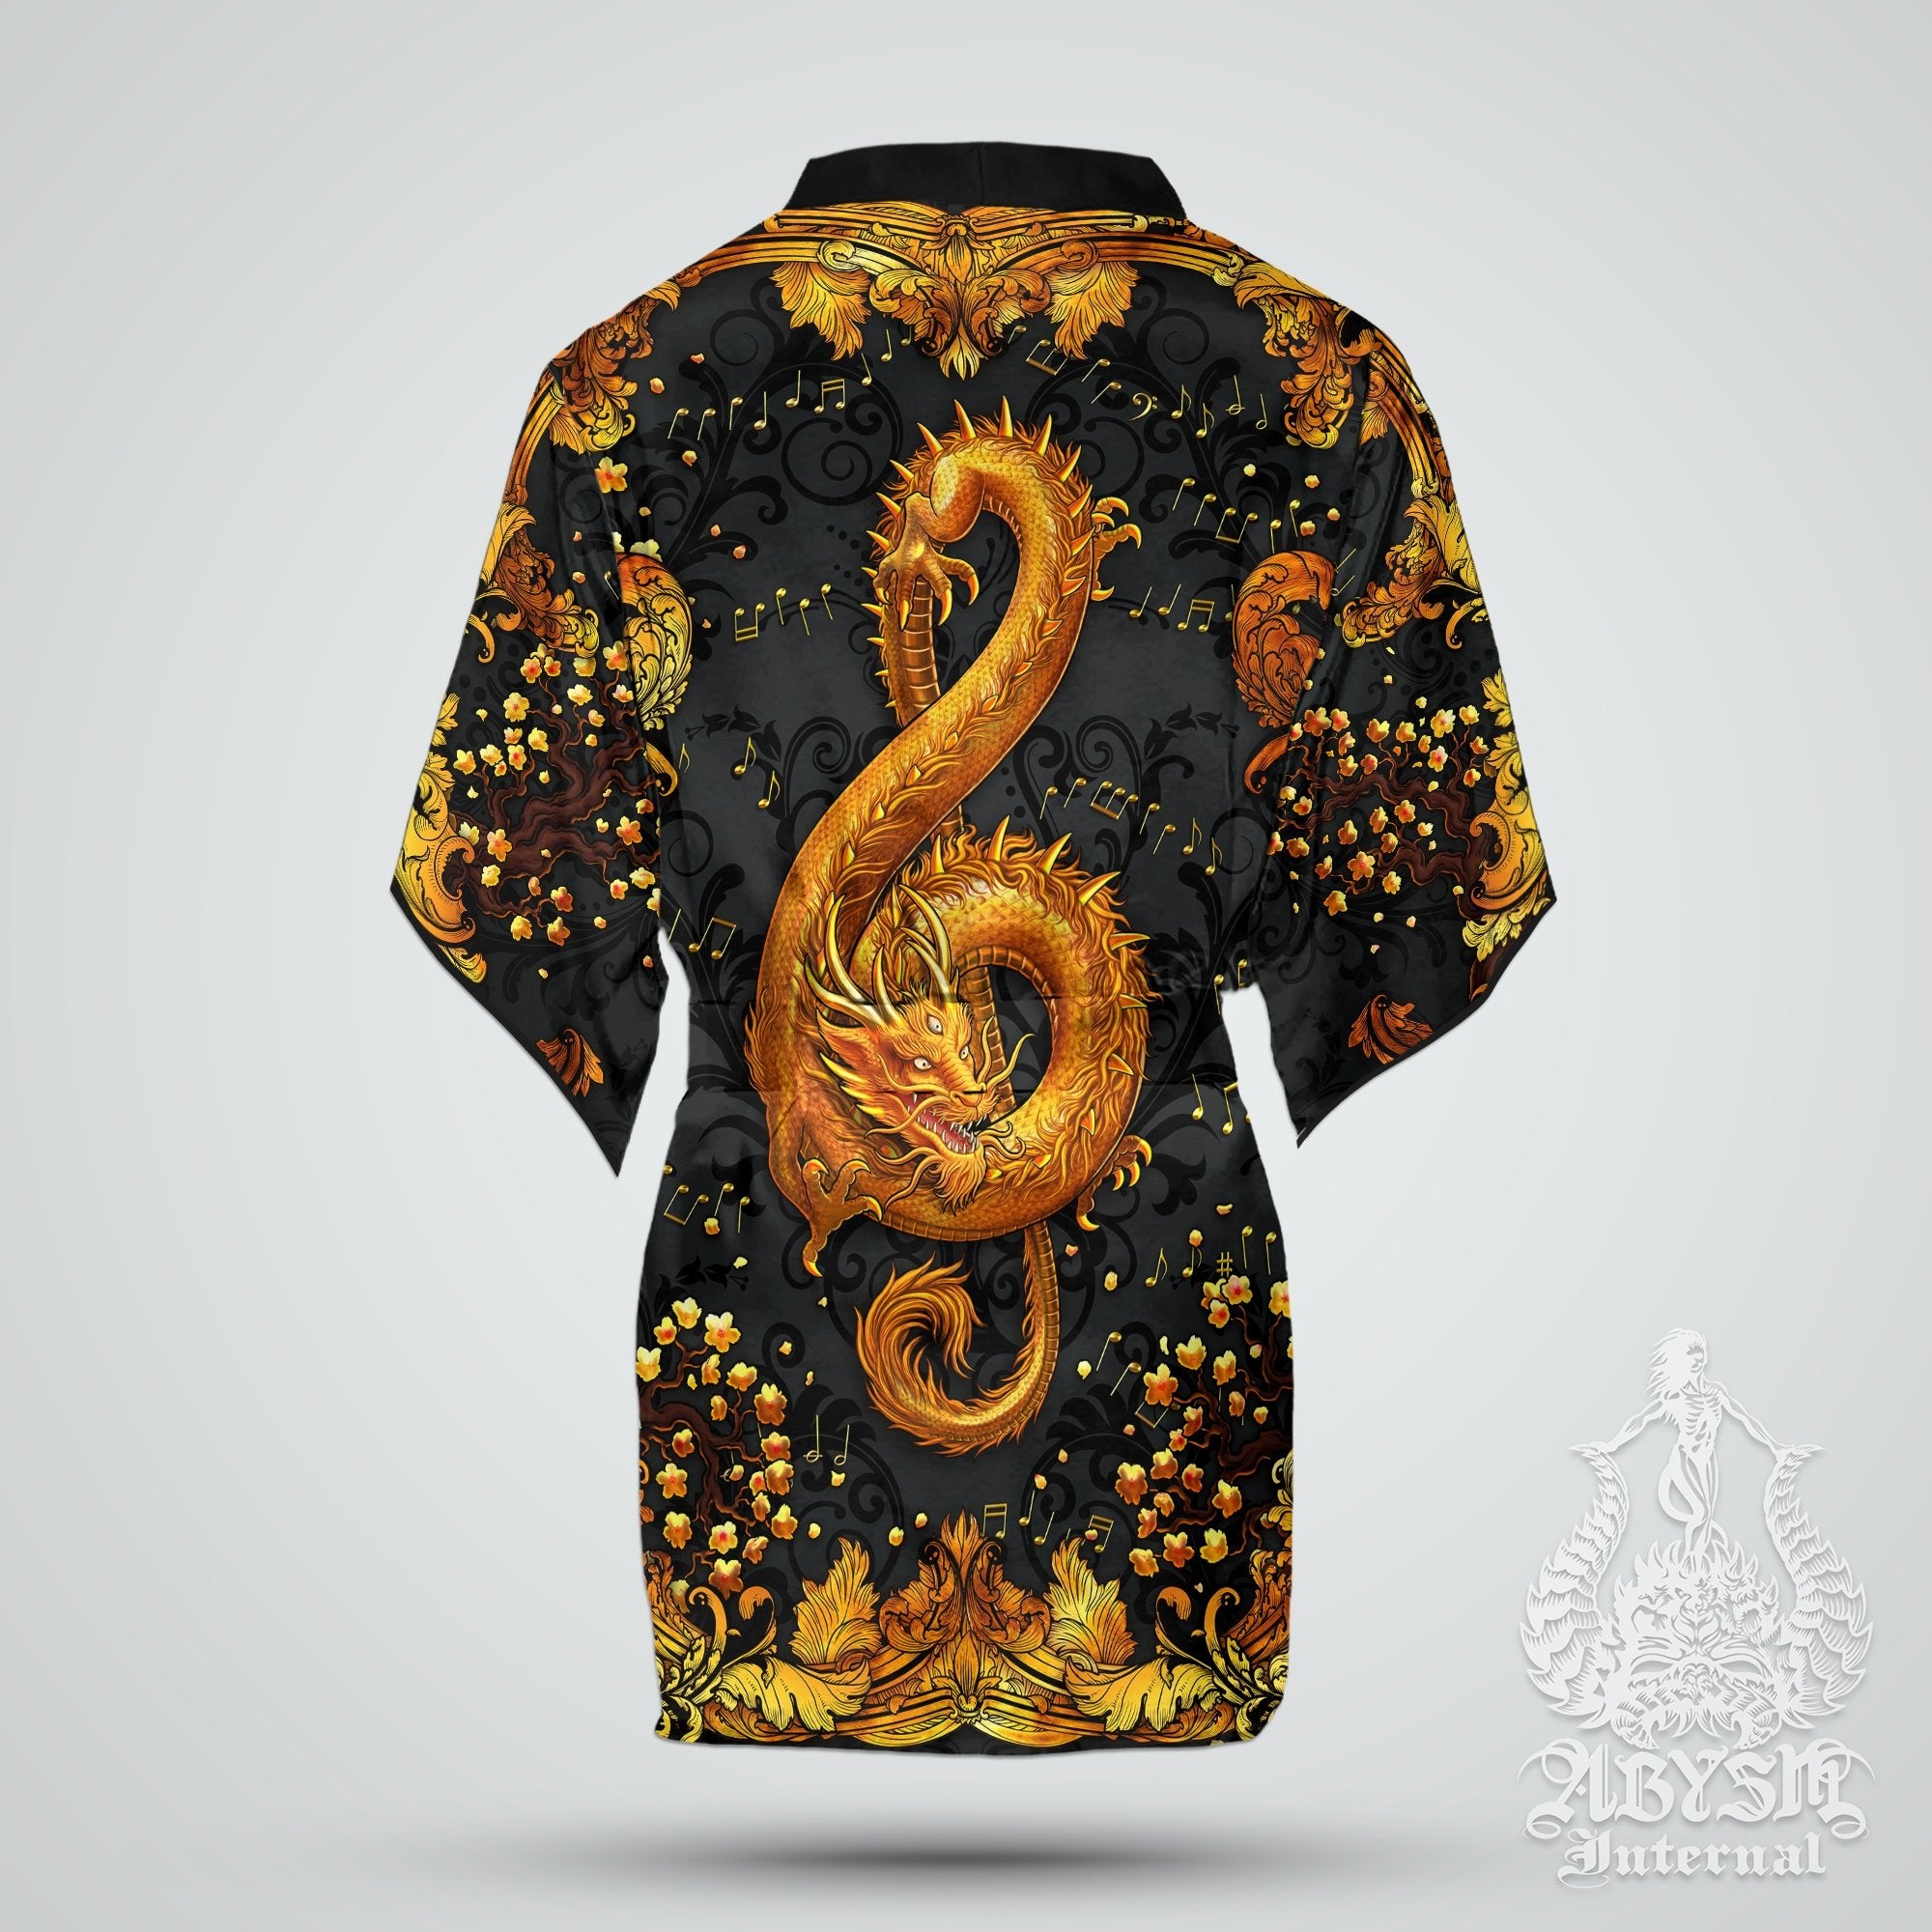 Music Cover Up, Beach Outfit, Party Kimono, Summer Festival Robe, Indie and Alternative Clothing, Unisex - Dragon, Gold Black - Abysm Internal